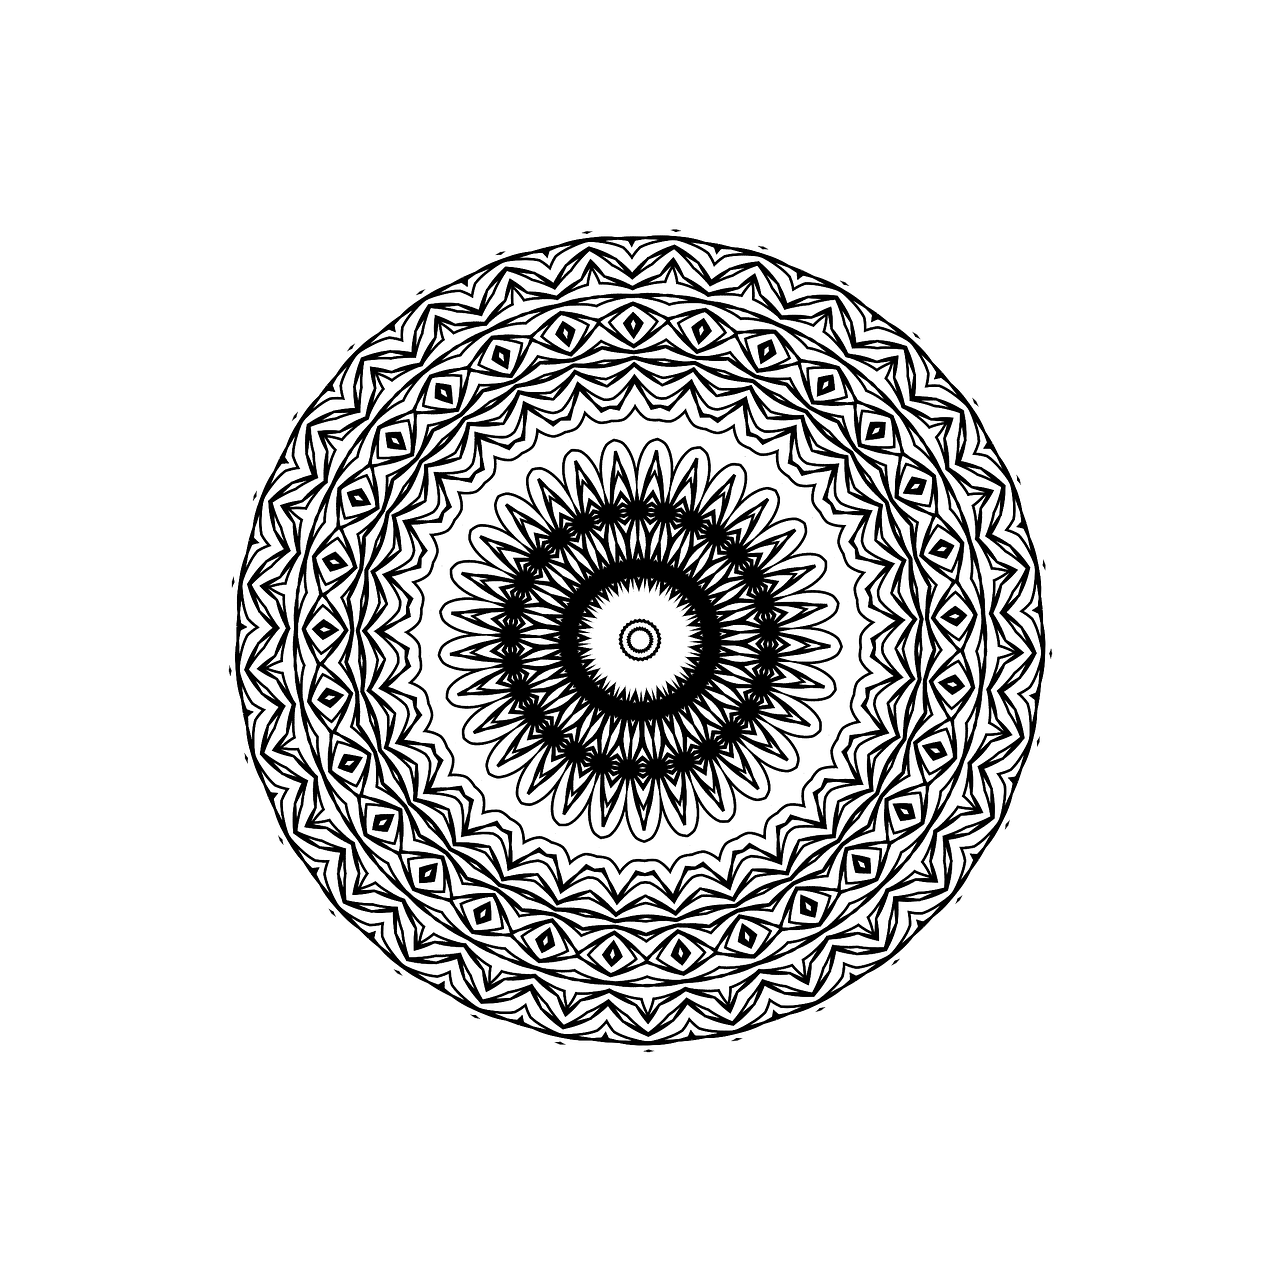 a black and white circular design on a black background, by Russell Patterson, tool band art, lowres, mandalas, amoled wallpaper